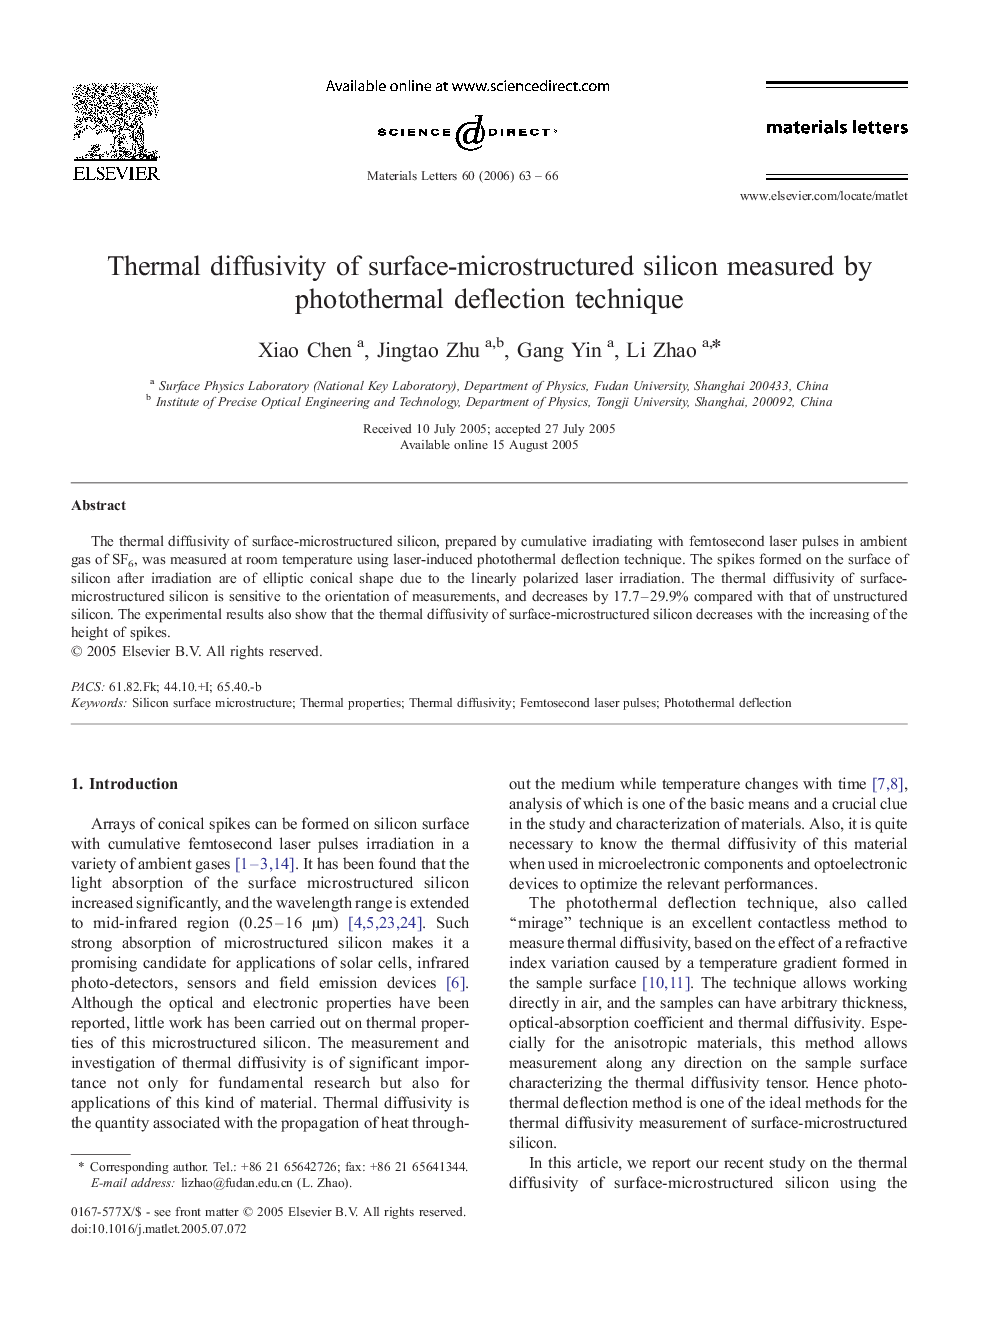 Thermal diffusivity of surface-microstructured silicon measured by photothermal deflection technique